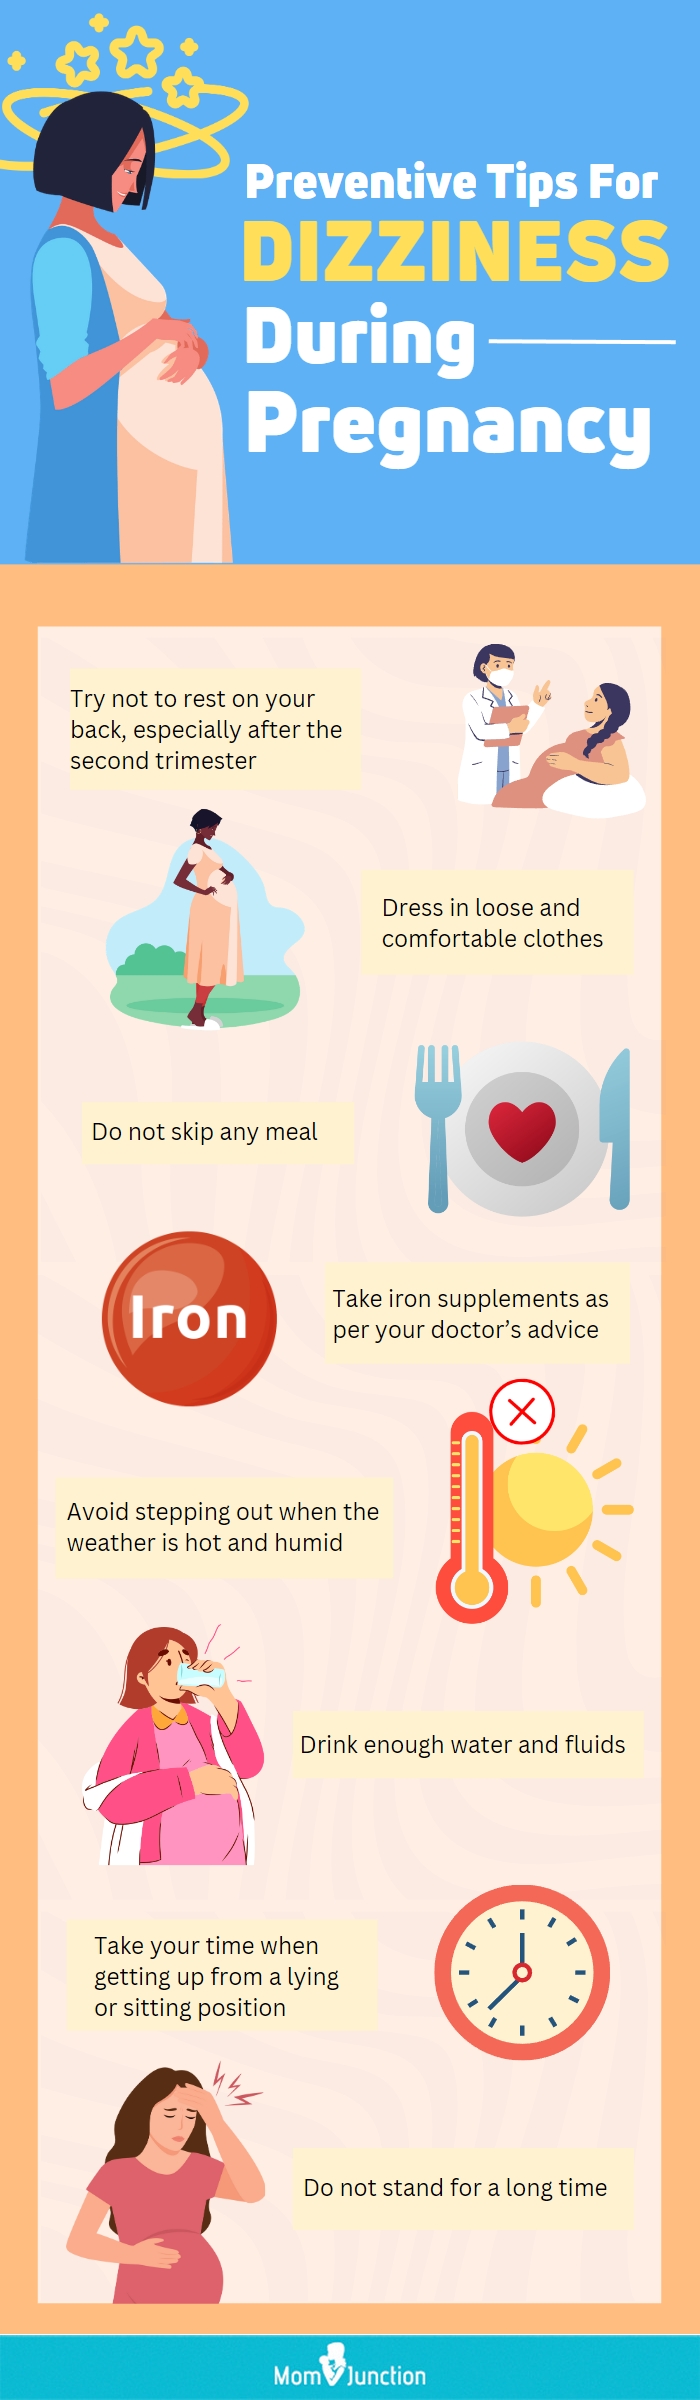 preventive tips for dizziness during pregnancy (infographic)